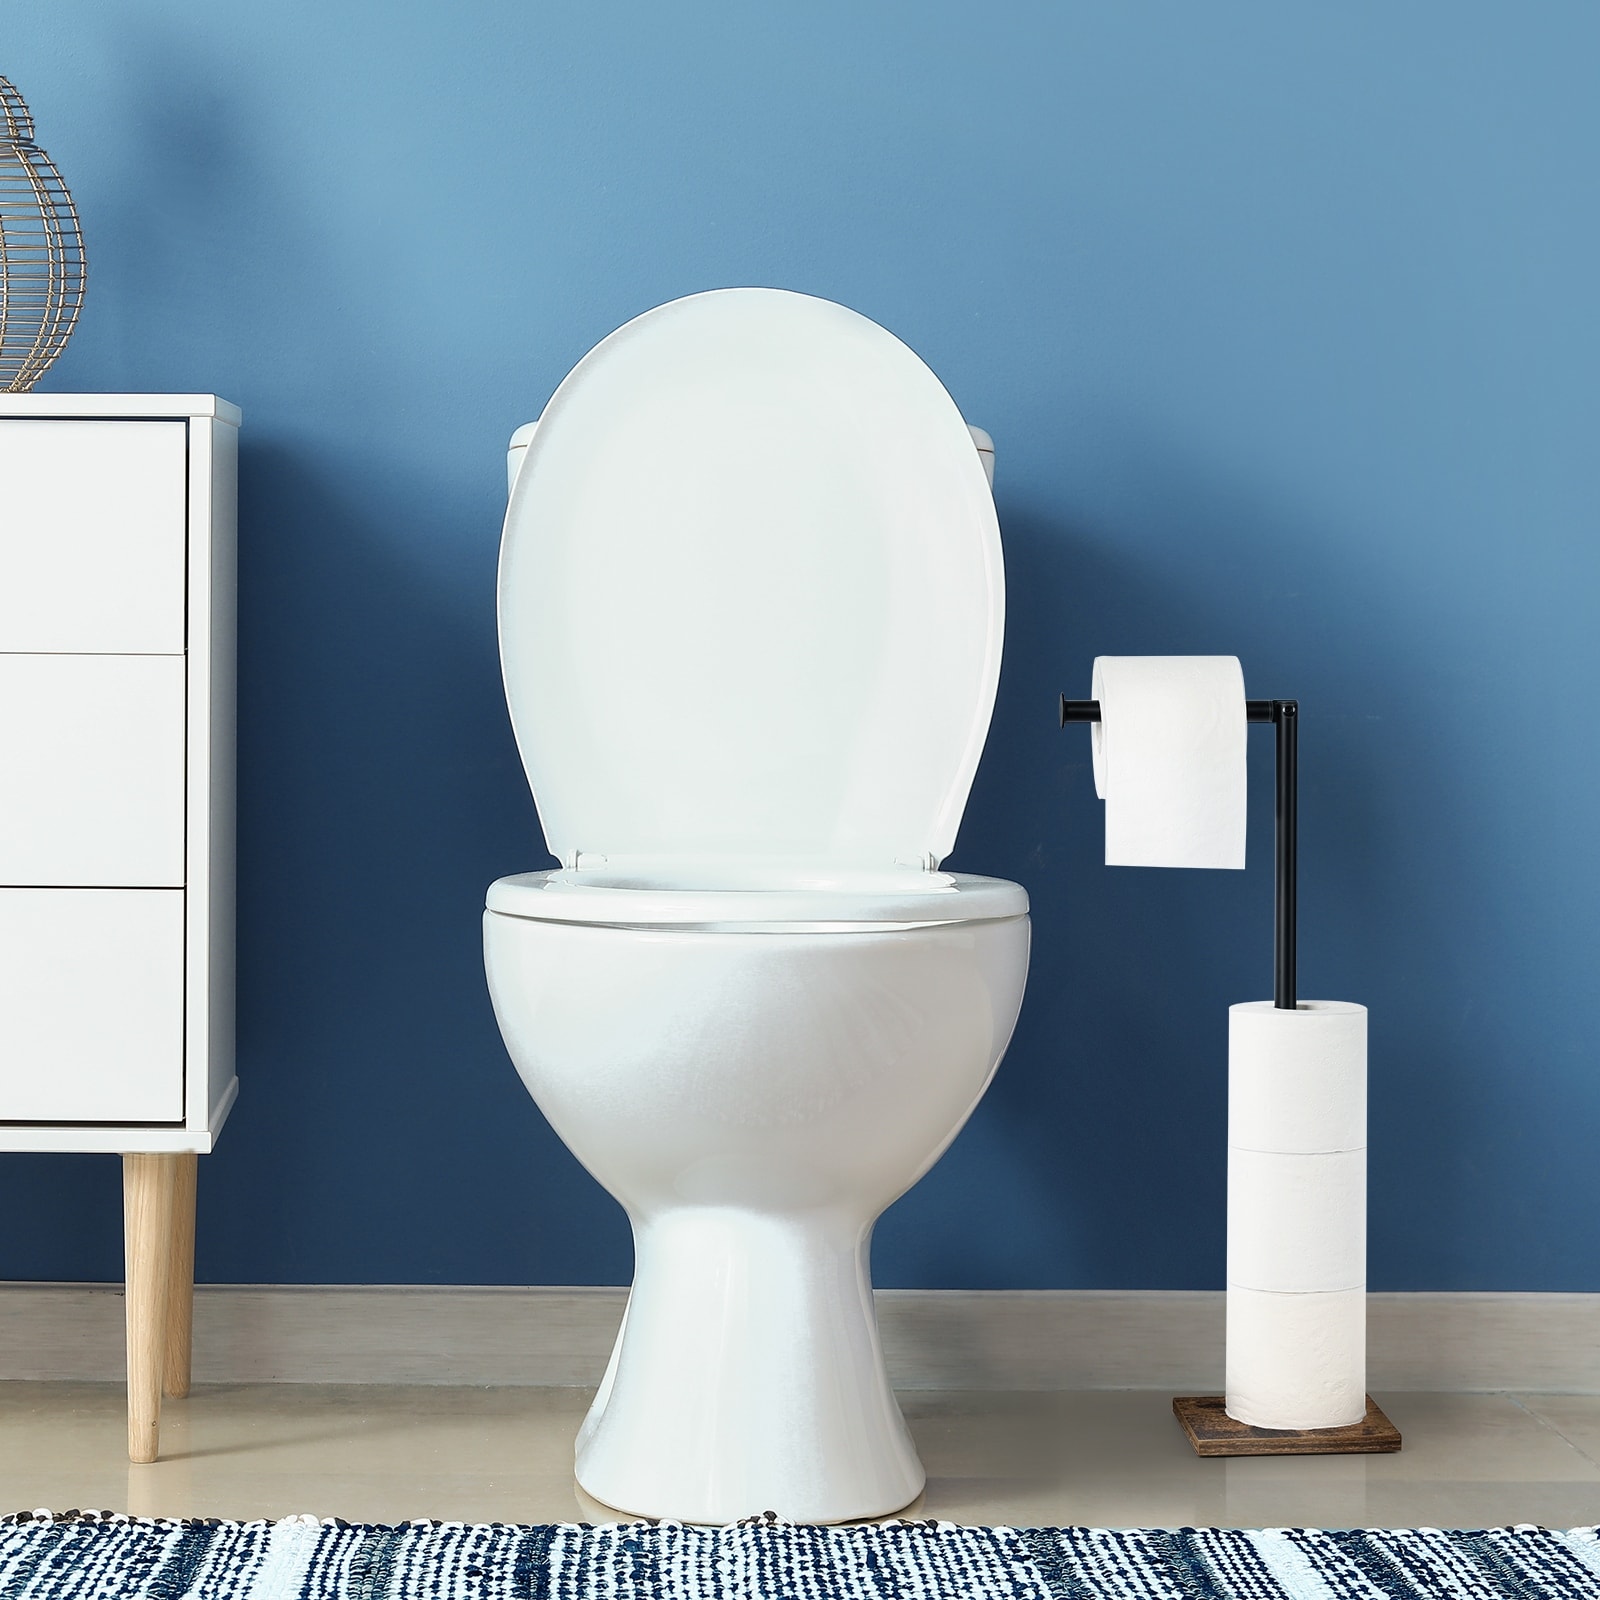 https://ak1.ostkcdn.com/images/products/is/images/direct/a4b8d9874110957c9b7c4534c0bb75fee46c8ea1/Free-Standing-Toilet-Paper-Holder-for-Bathroom.jpg